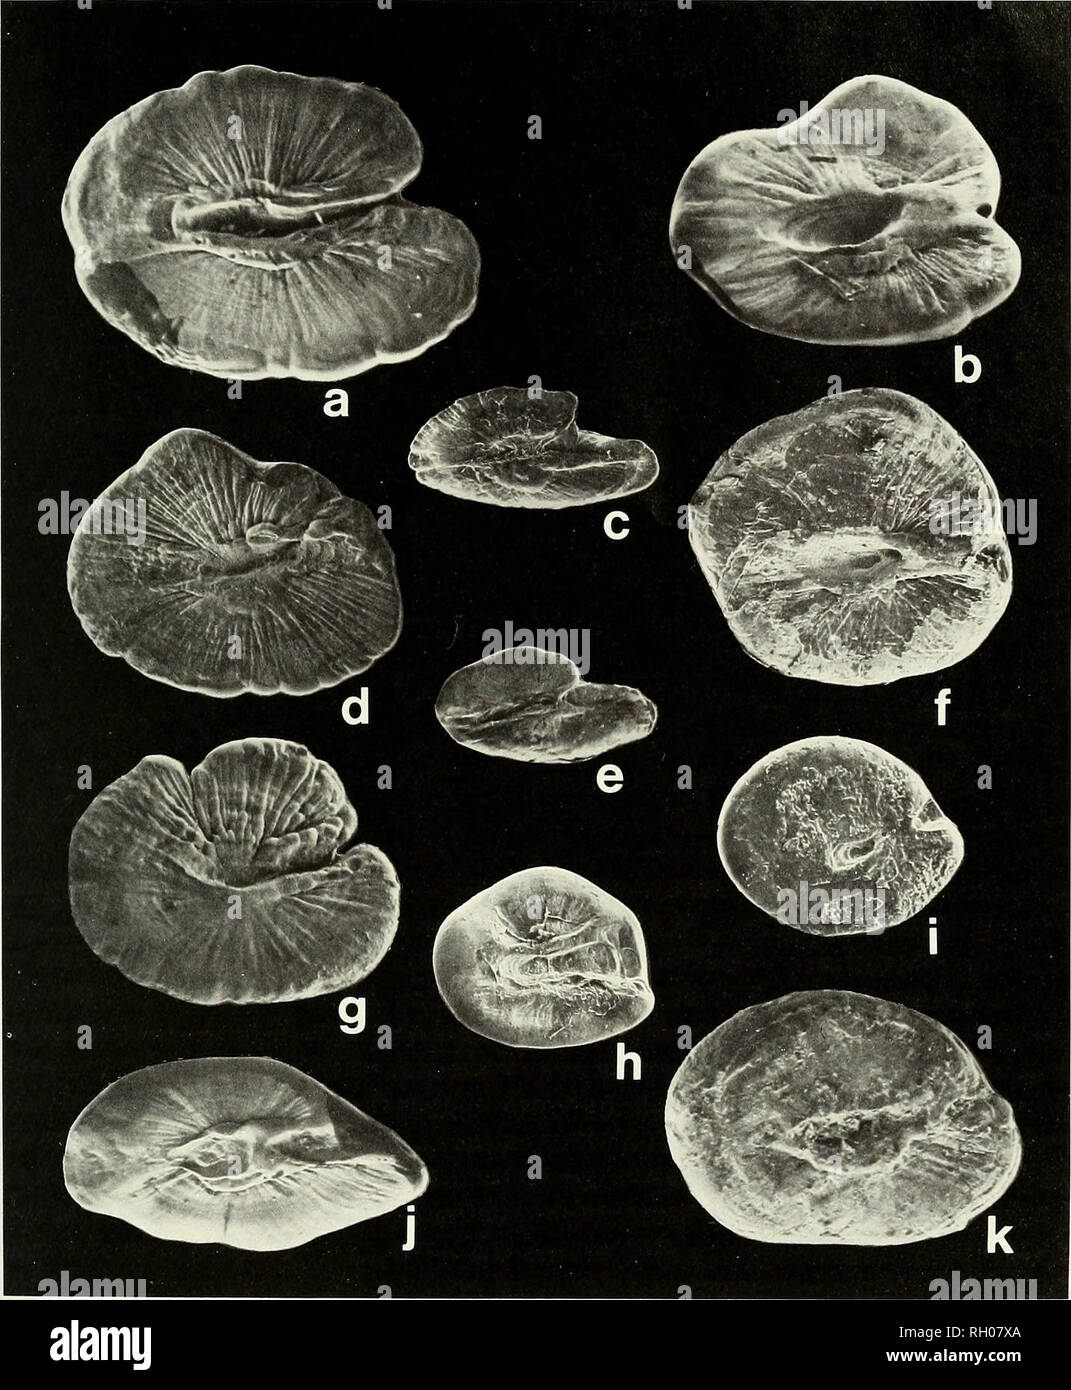 . Bulletin. Science; Natural history; Natural history. PARALIPARIS NASSARUM 79. Fig. 2. Medial faces, left sagittae of 11 species of liparidids that inhabit waters of the eastern north Pacific and Bering Sea. Species name is followed by otolith length and height (in mm) and standard (SL) or total length of the fish it came from (if known): a. Careproctus melanurus 3.1 by 2.4 (203 mm SL); b. Paraliparis nassarum 2.5 by 2.0 (304 mm SL); c. Liparis liparis 1.9 by 0.9 (unk.); d. Careproctus furcellus 3.7 by 2.9 (unk.); e. Liparis pulchellus 2.8 by 1.5 (178 mm SL); f Paraliparis rosaceus 1.9 (207 m Stock Photo